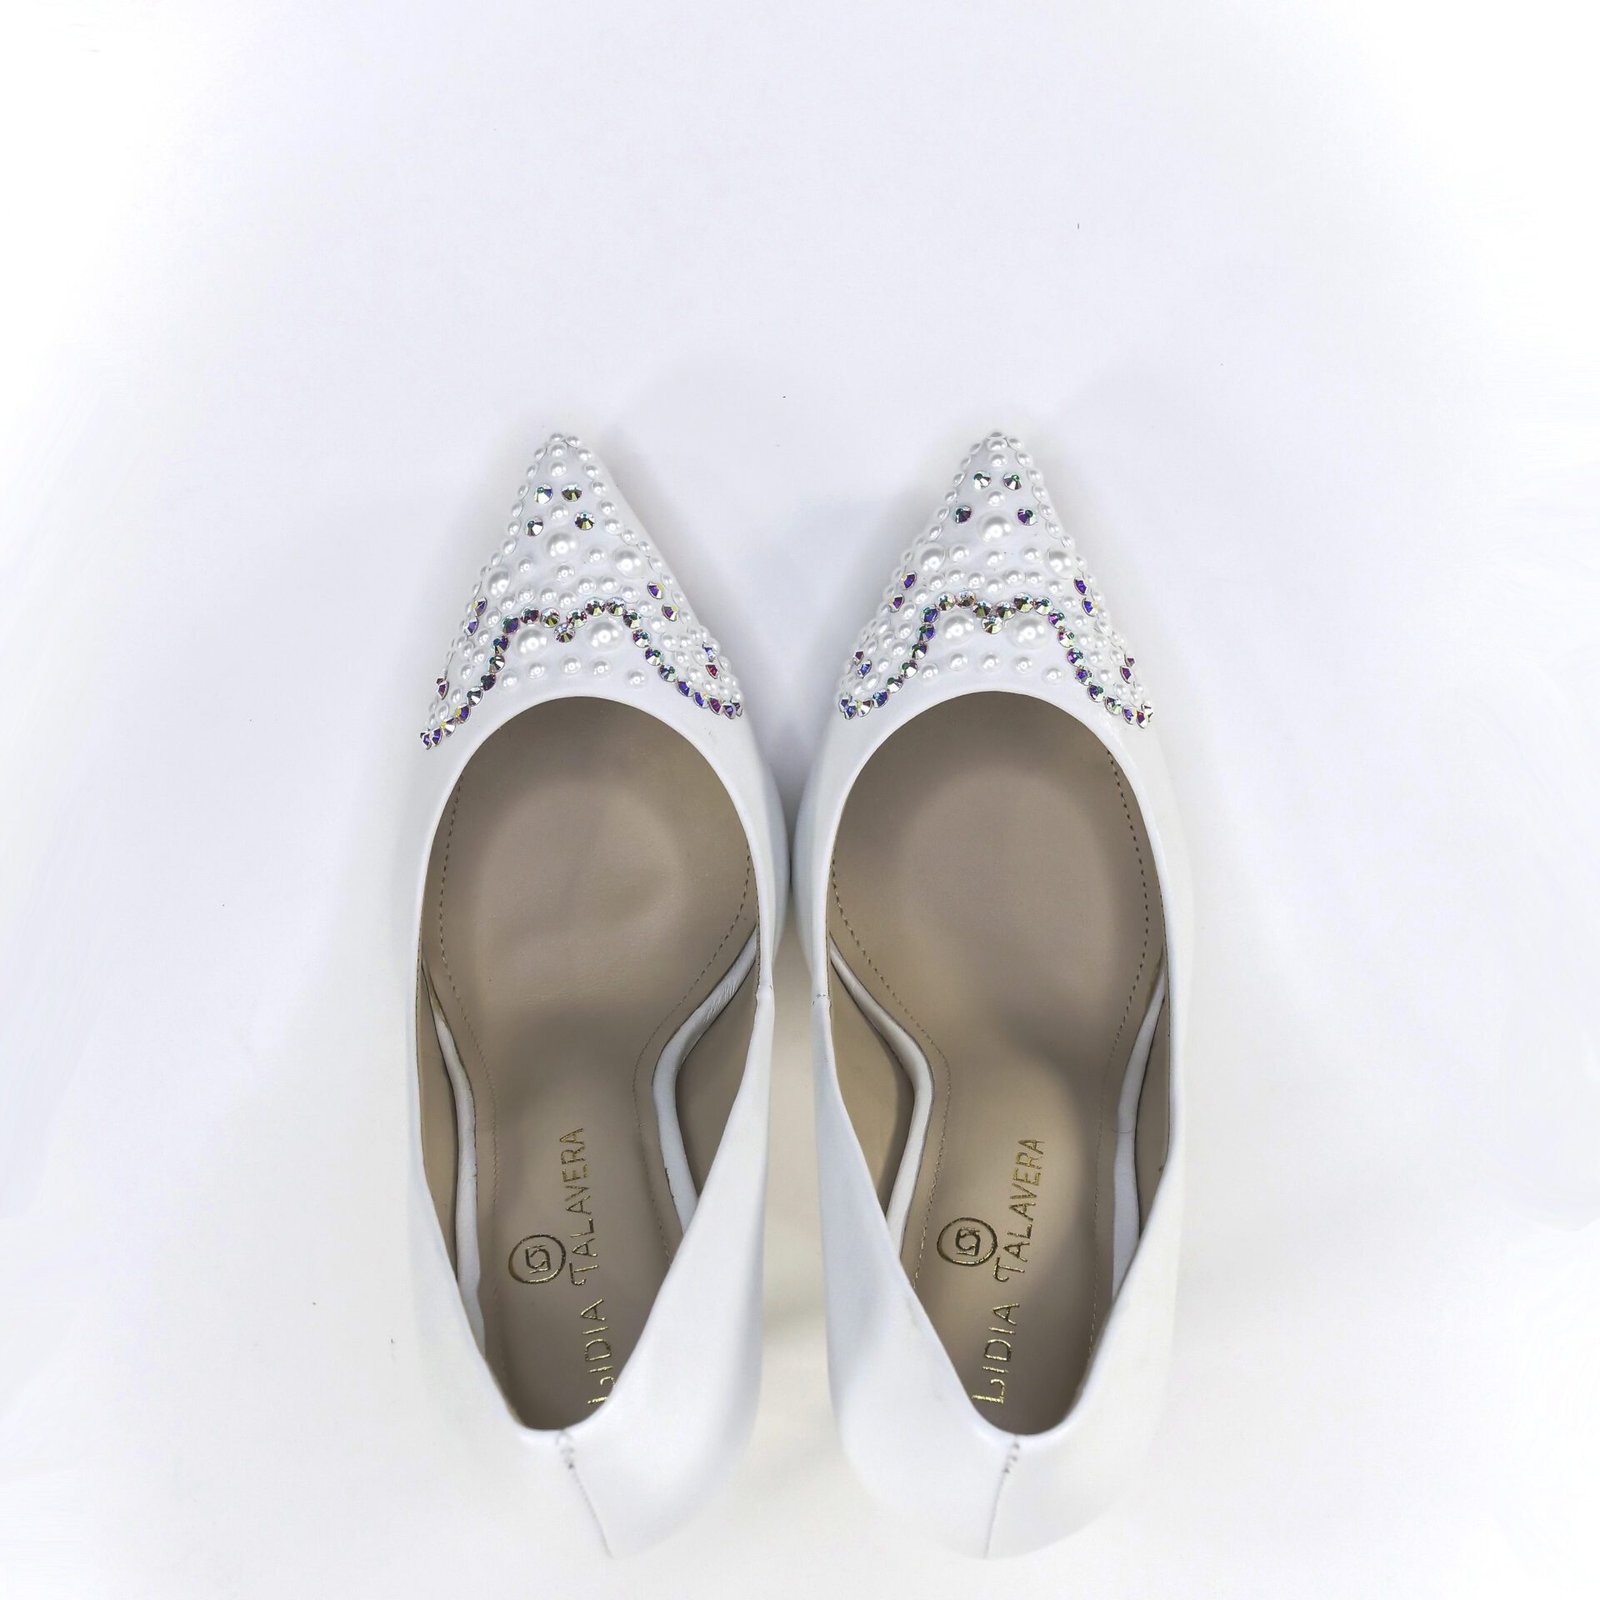 Extra Wide Bridal shoes with crystals